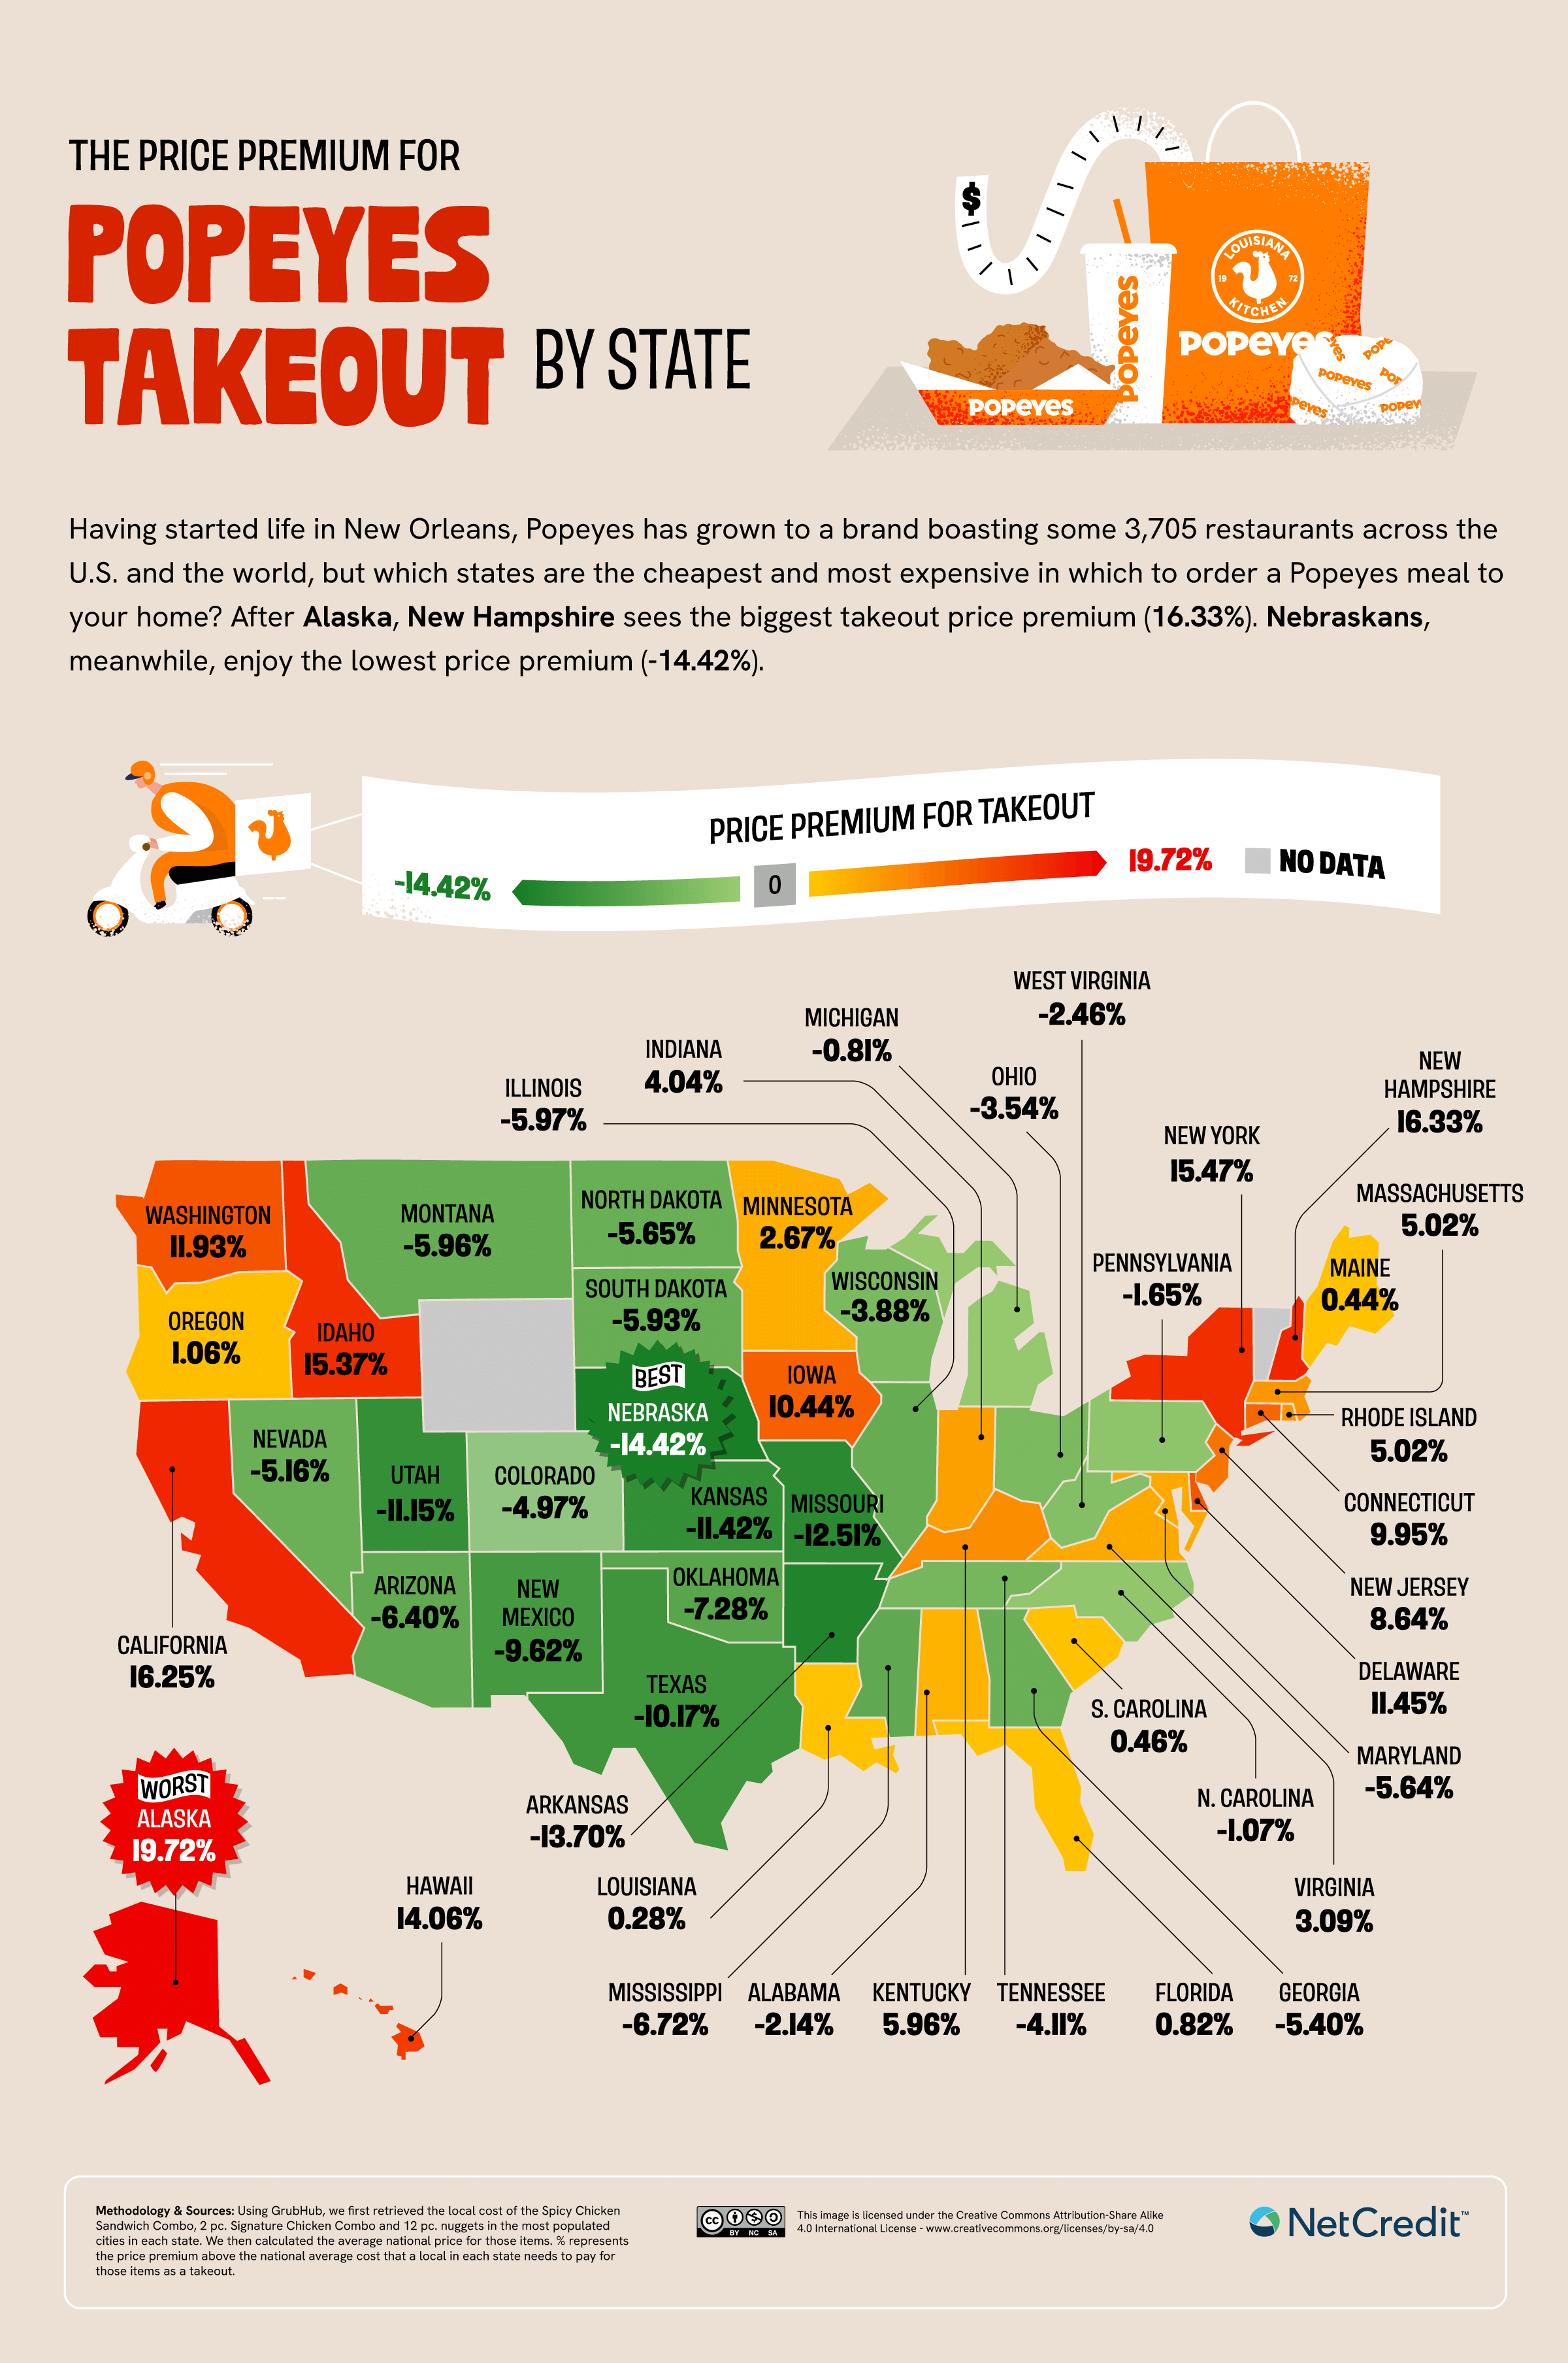 Infographic detailing the price of Popeyes takeout by state.